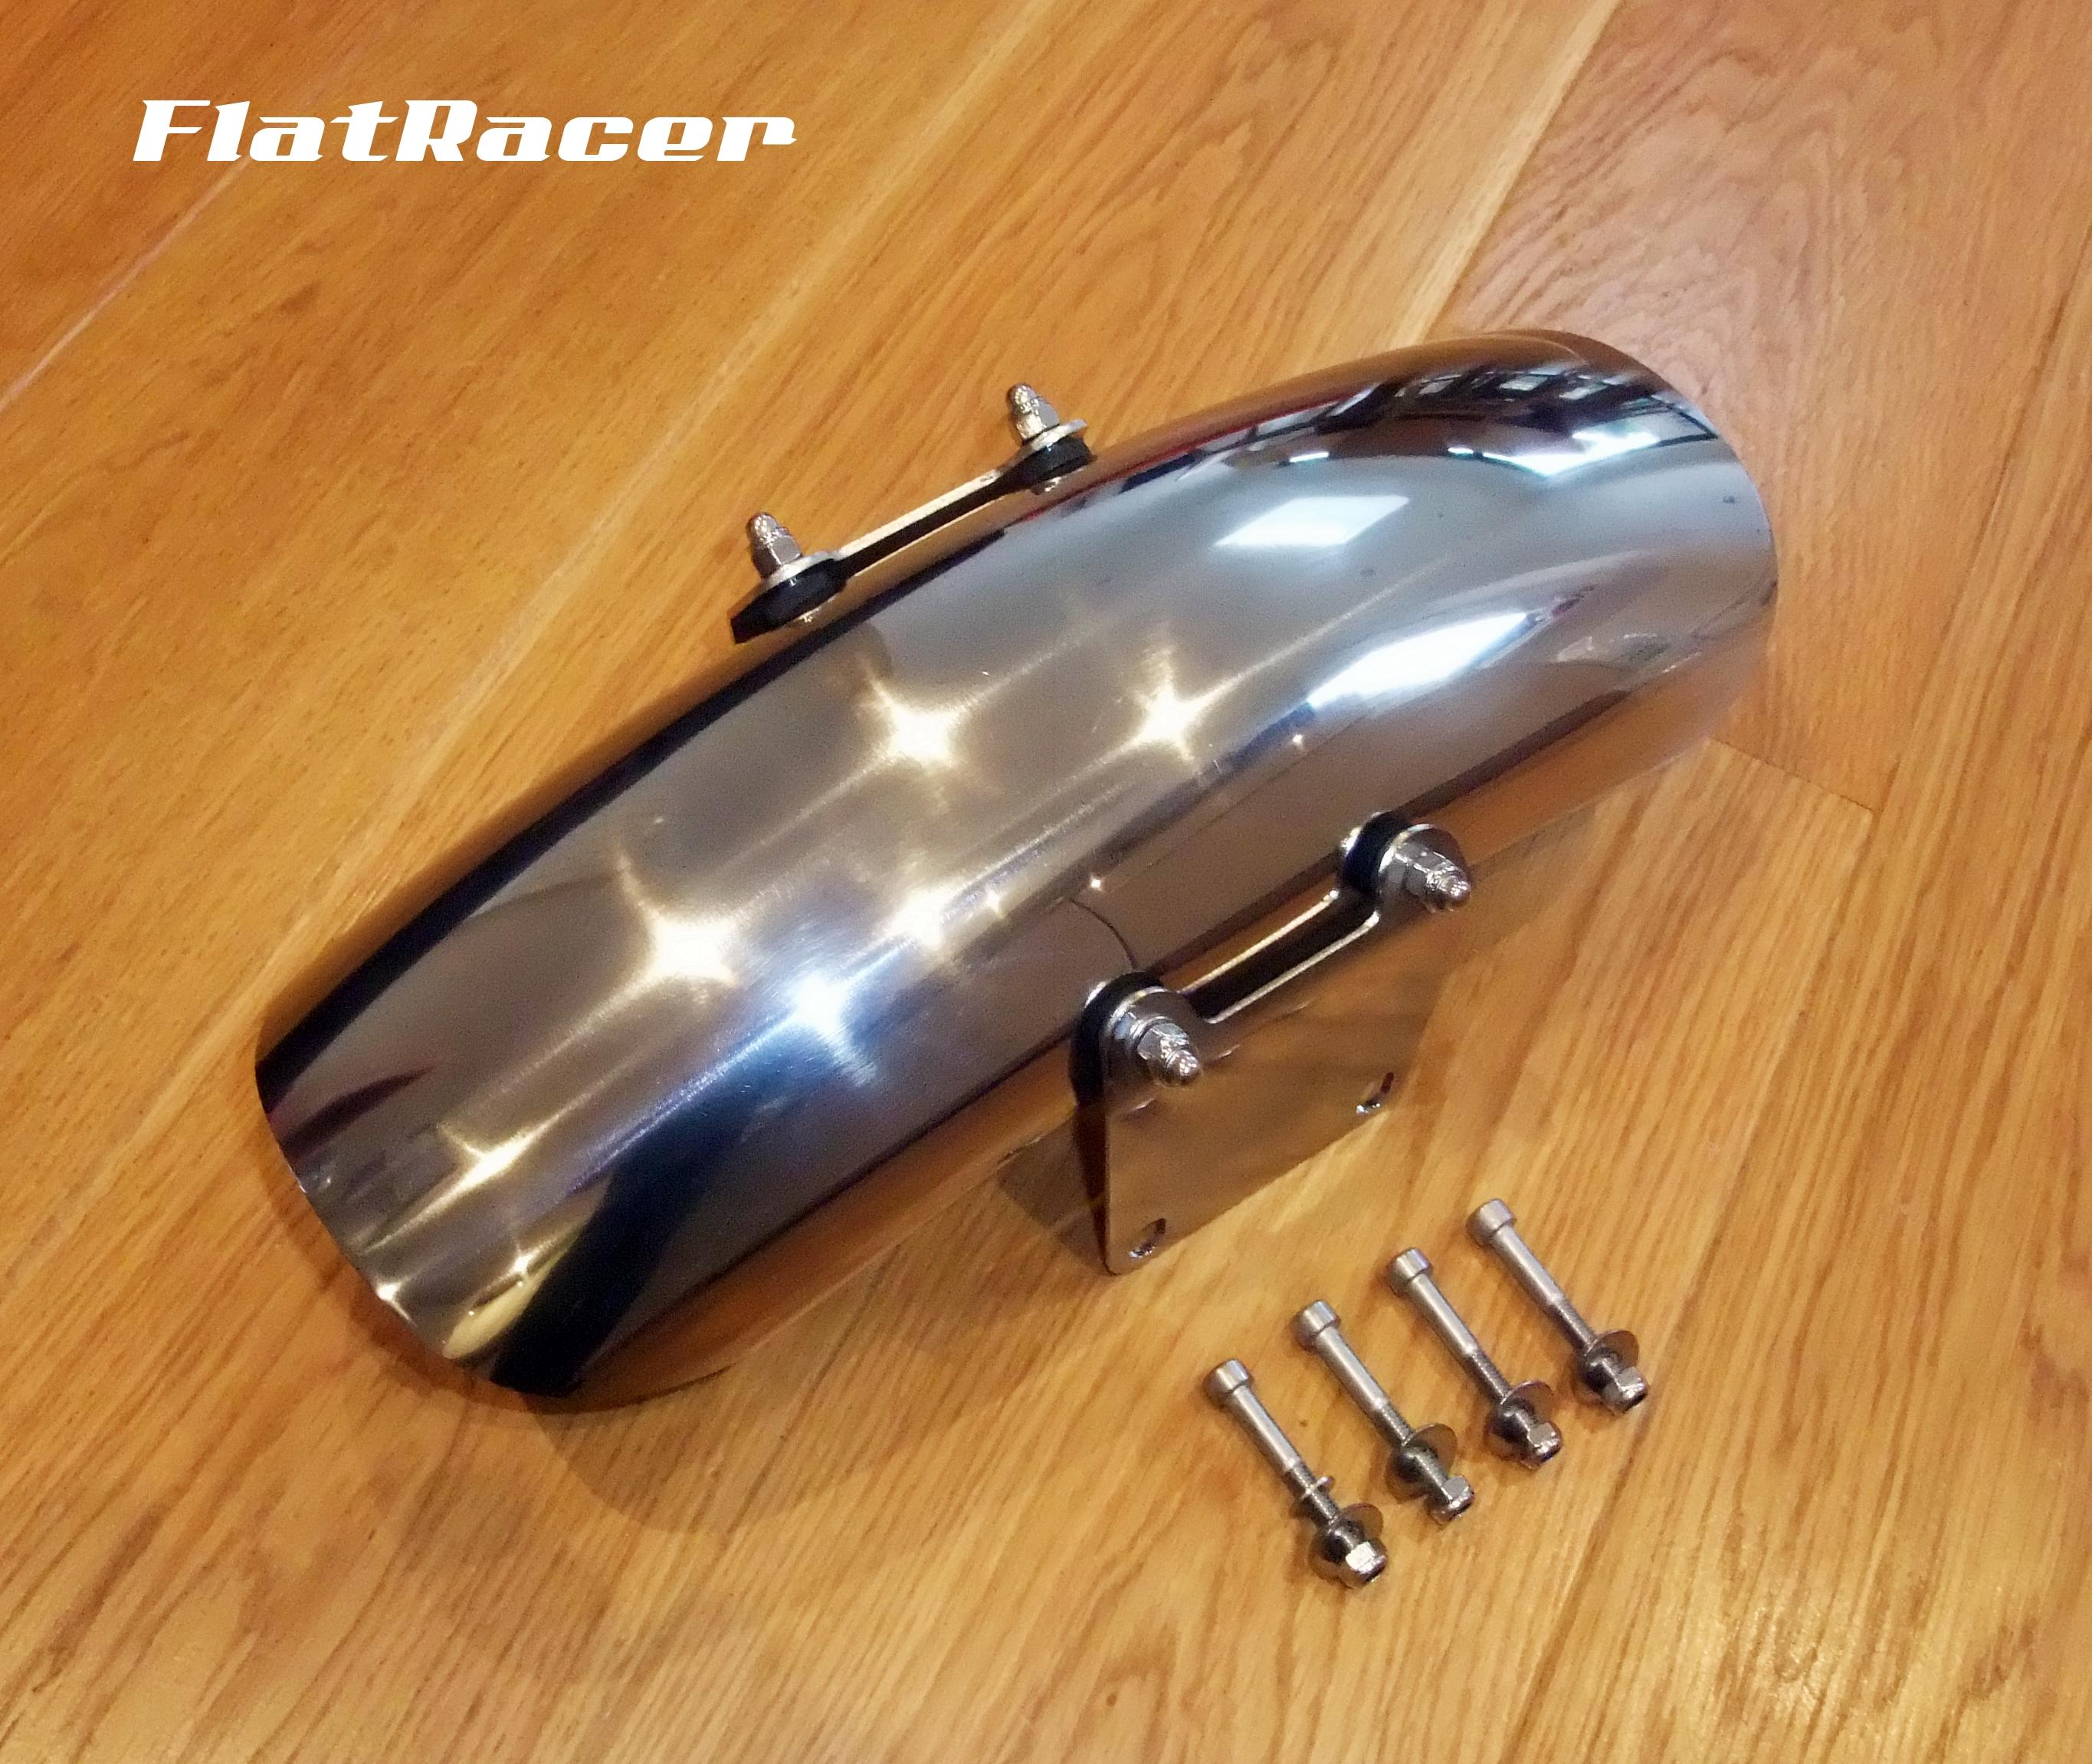 FlatRacer BMW Airhead Boxer R45 & R65 (78-84) stainless steel short front mudguard